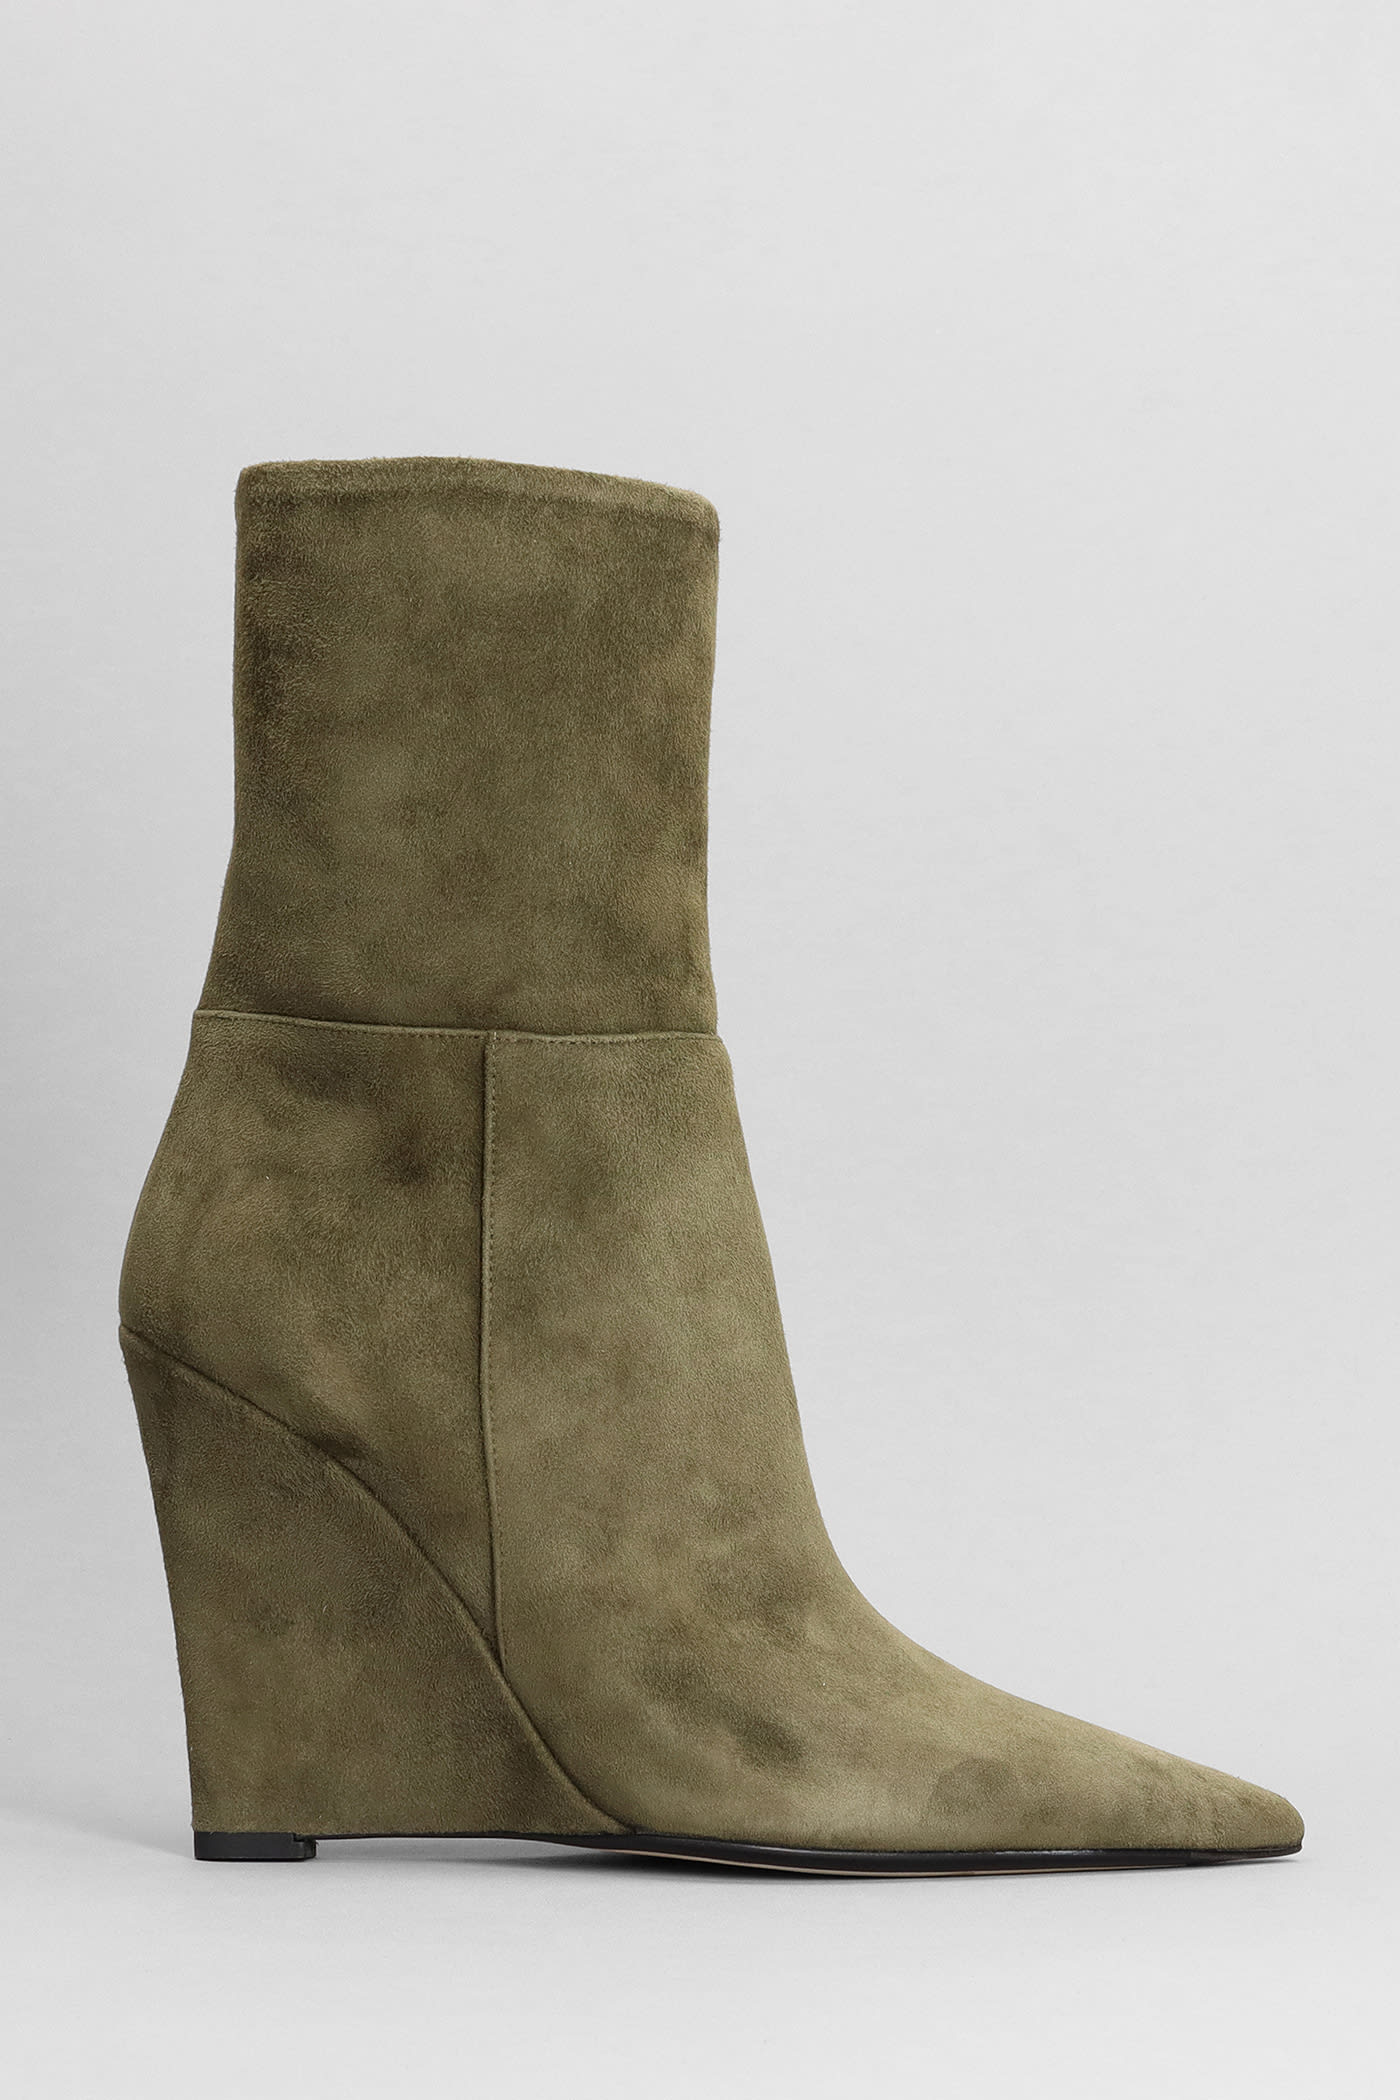 Bay 100 Wedges In Green Suede